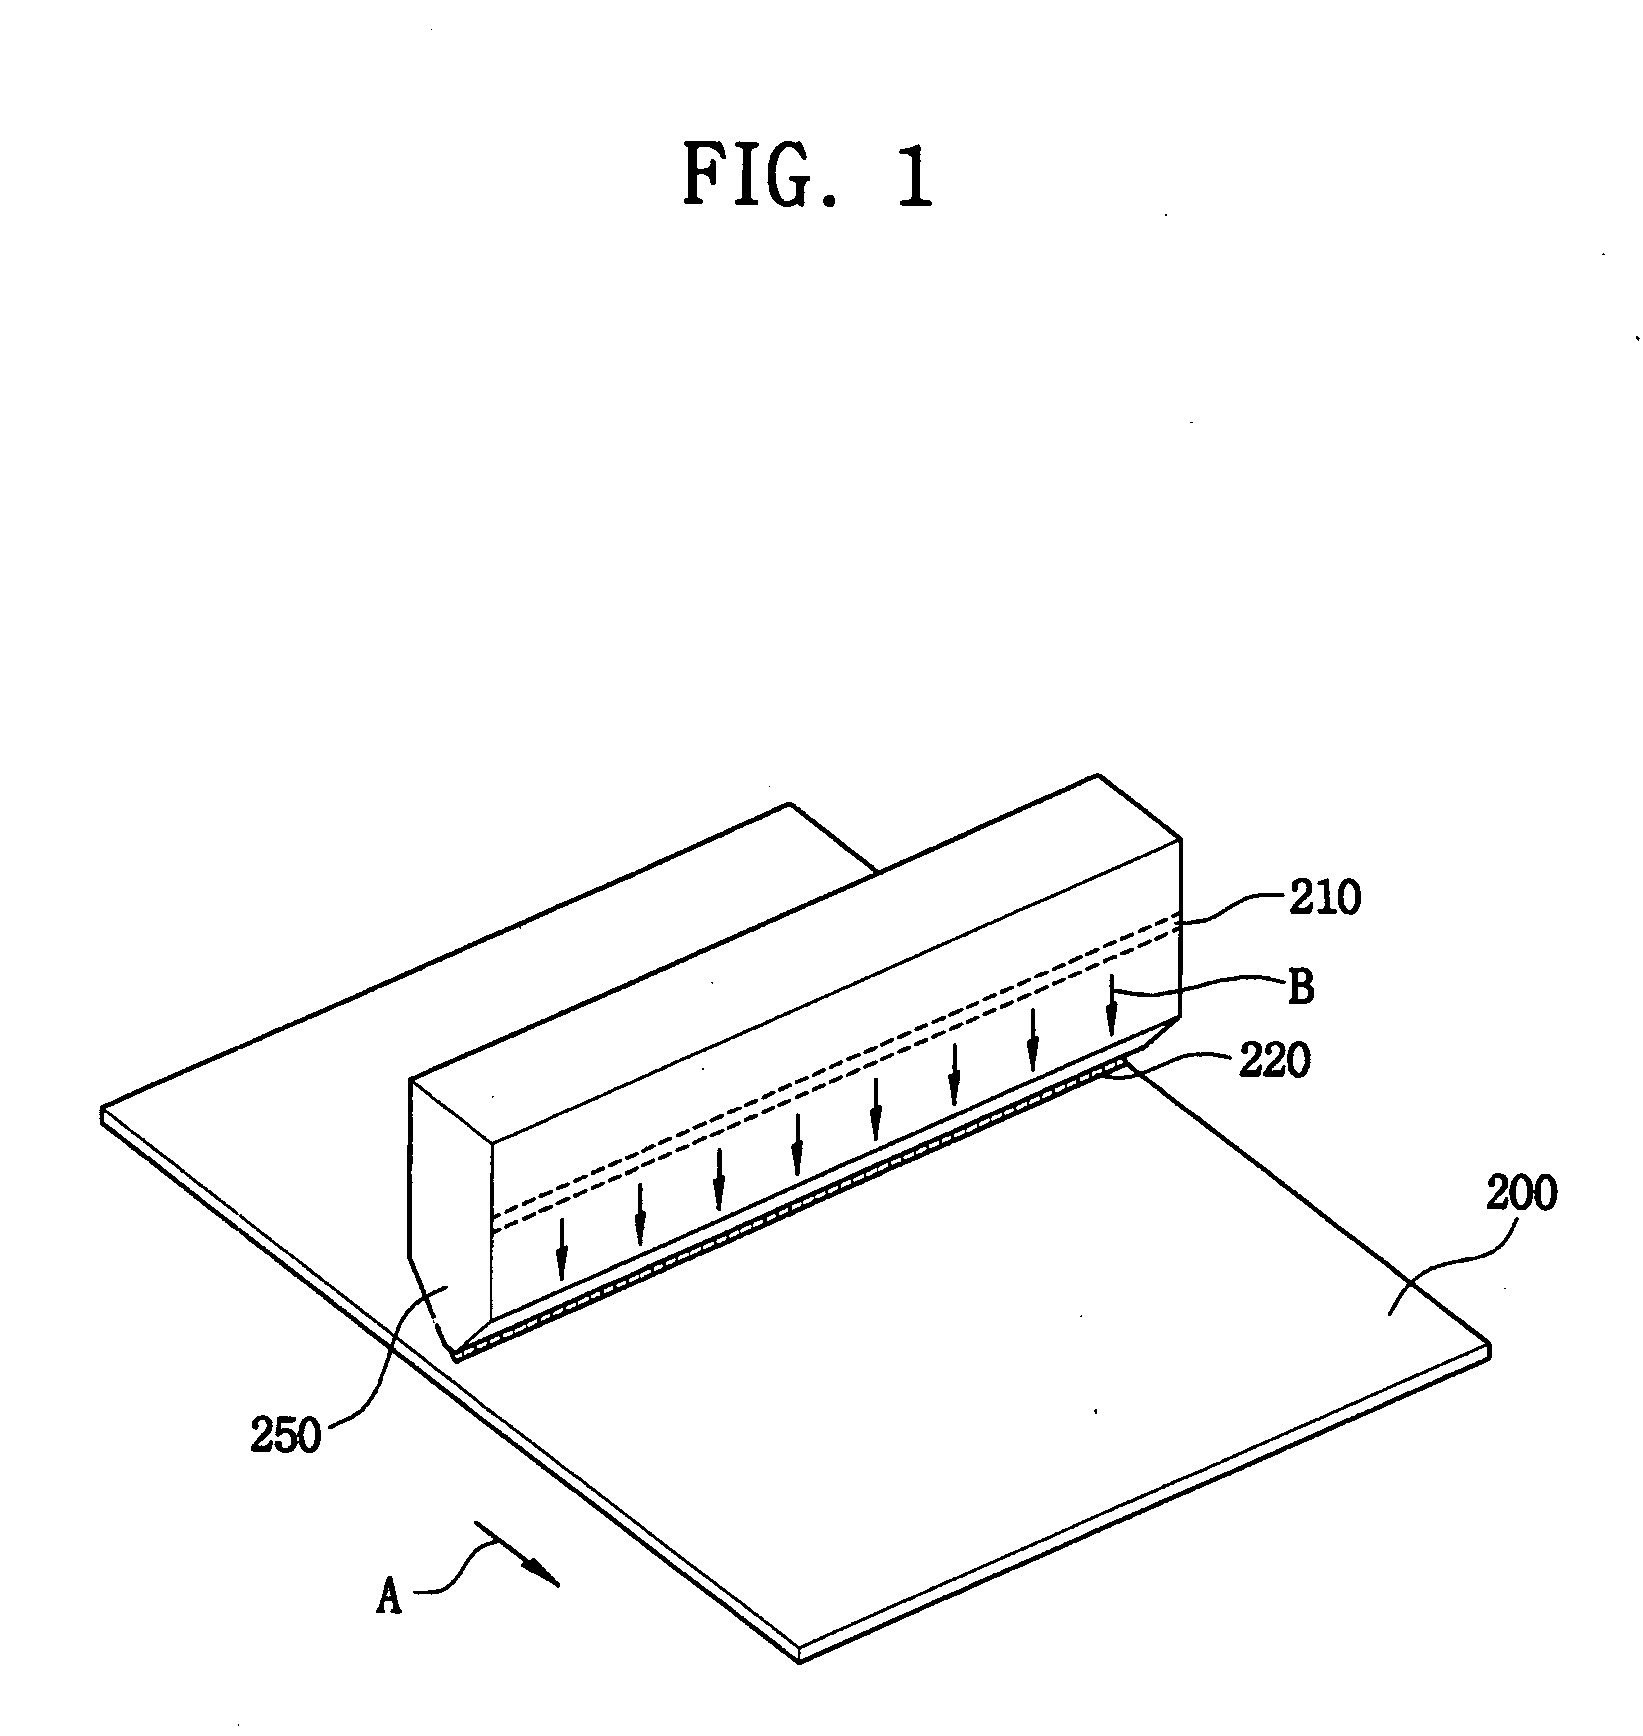 Photoresist composition for a spinless coater and method of forming a photoresist pattern using the same